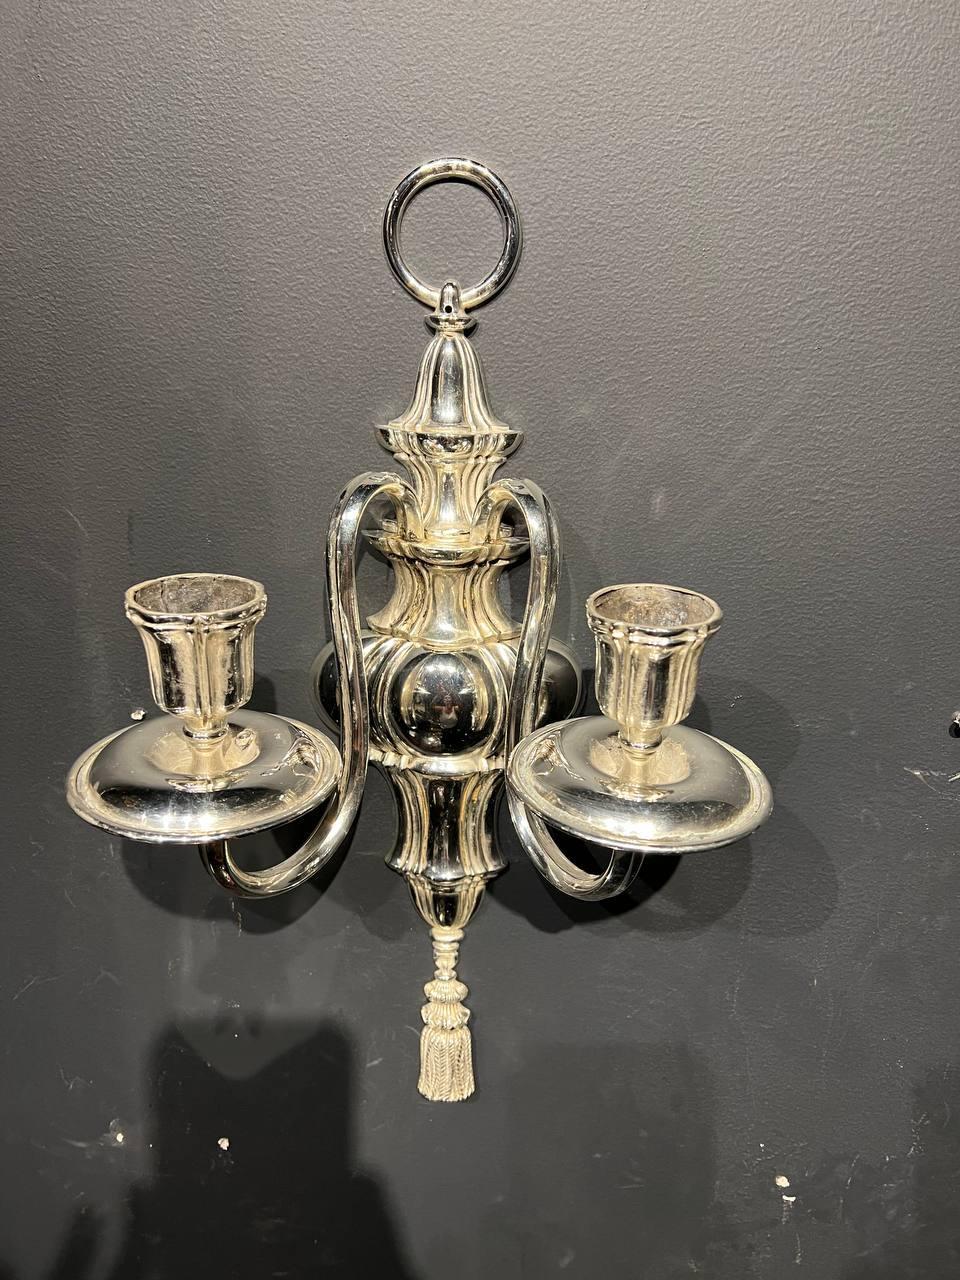 A pair of circa 1920’s Caldwell silver plated sconces with two lights